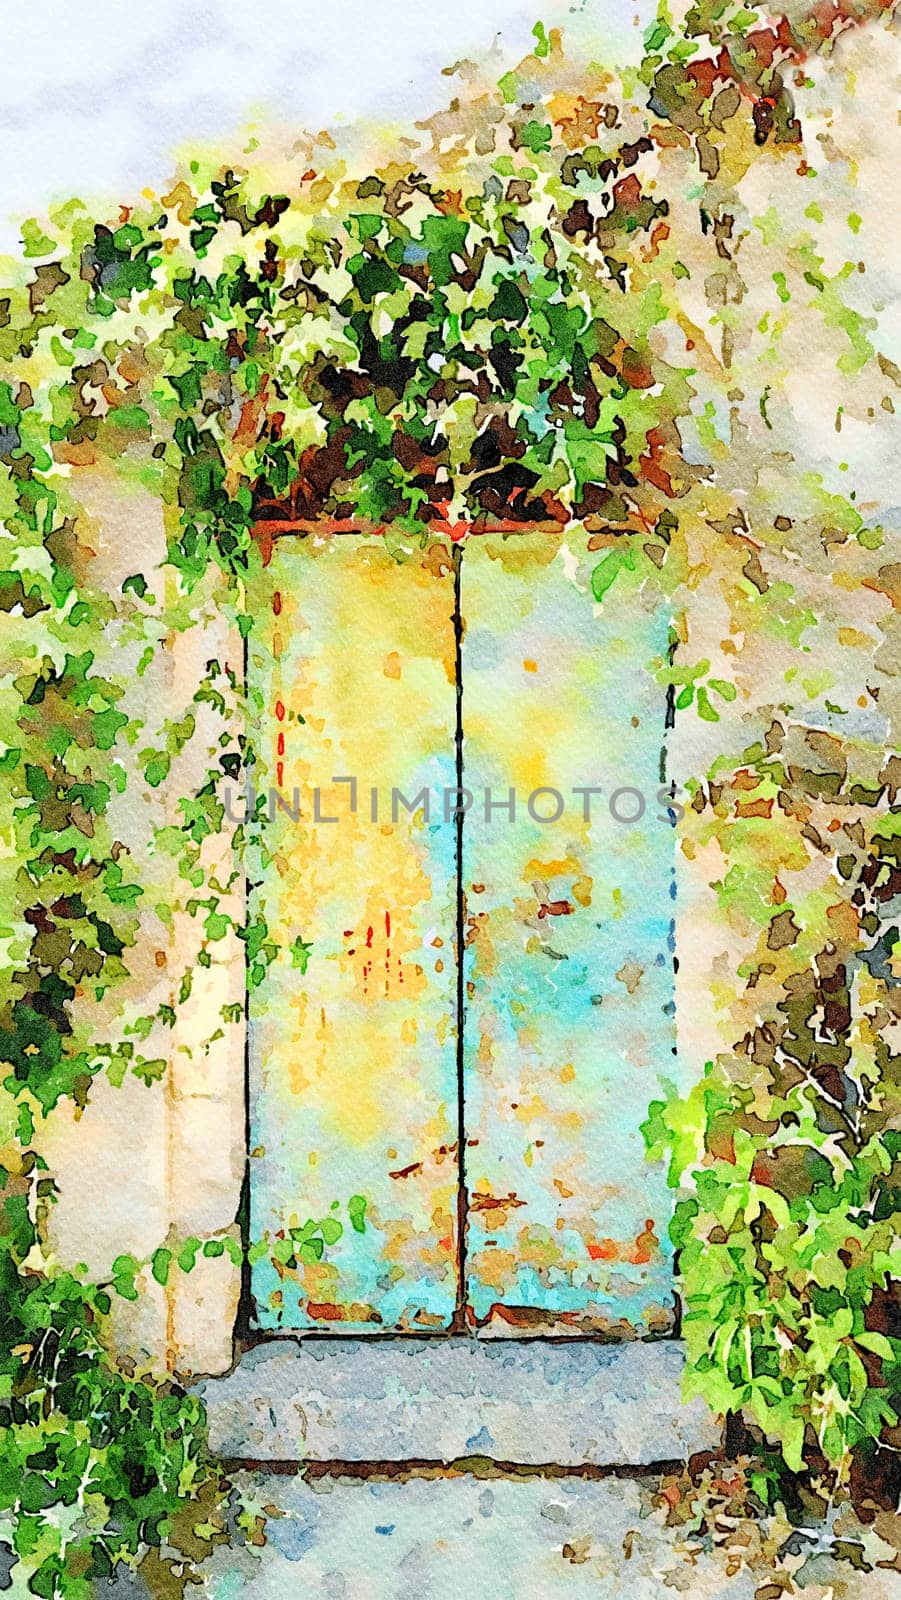 The entrance door with metal shutters of an ancient house in southern Europe. by Jamaladeen